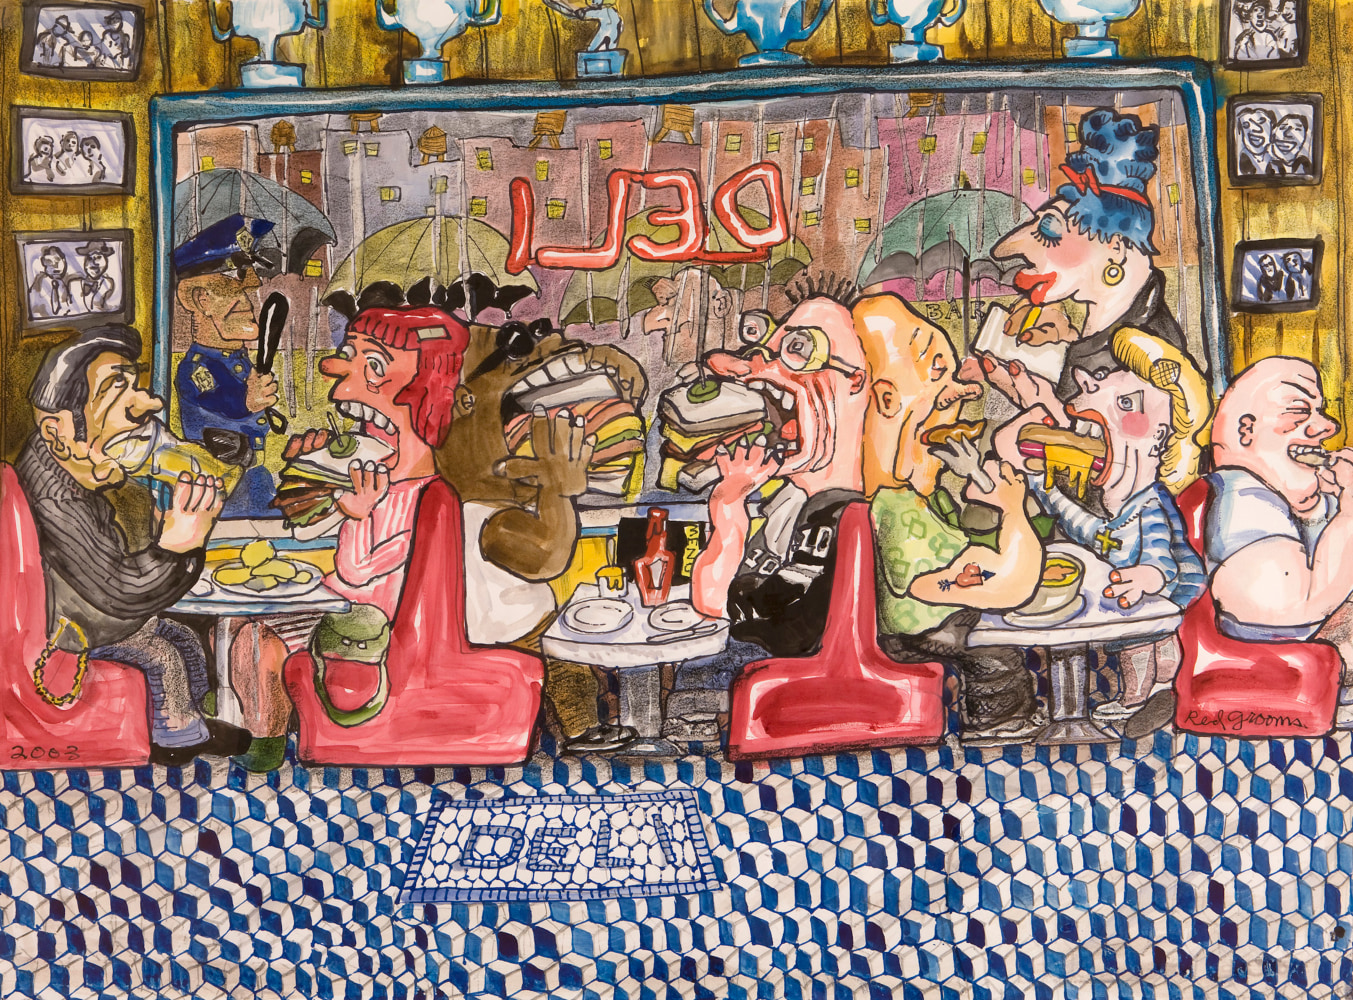 Red Grooms

Deli, 2003

ink and crayon on paper

22 1/2 x 30 in. / 57.1 x 76.2 cm